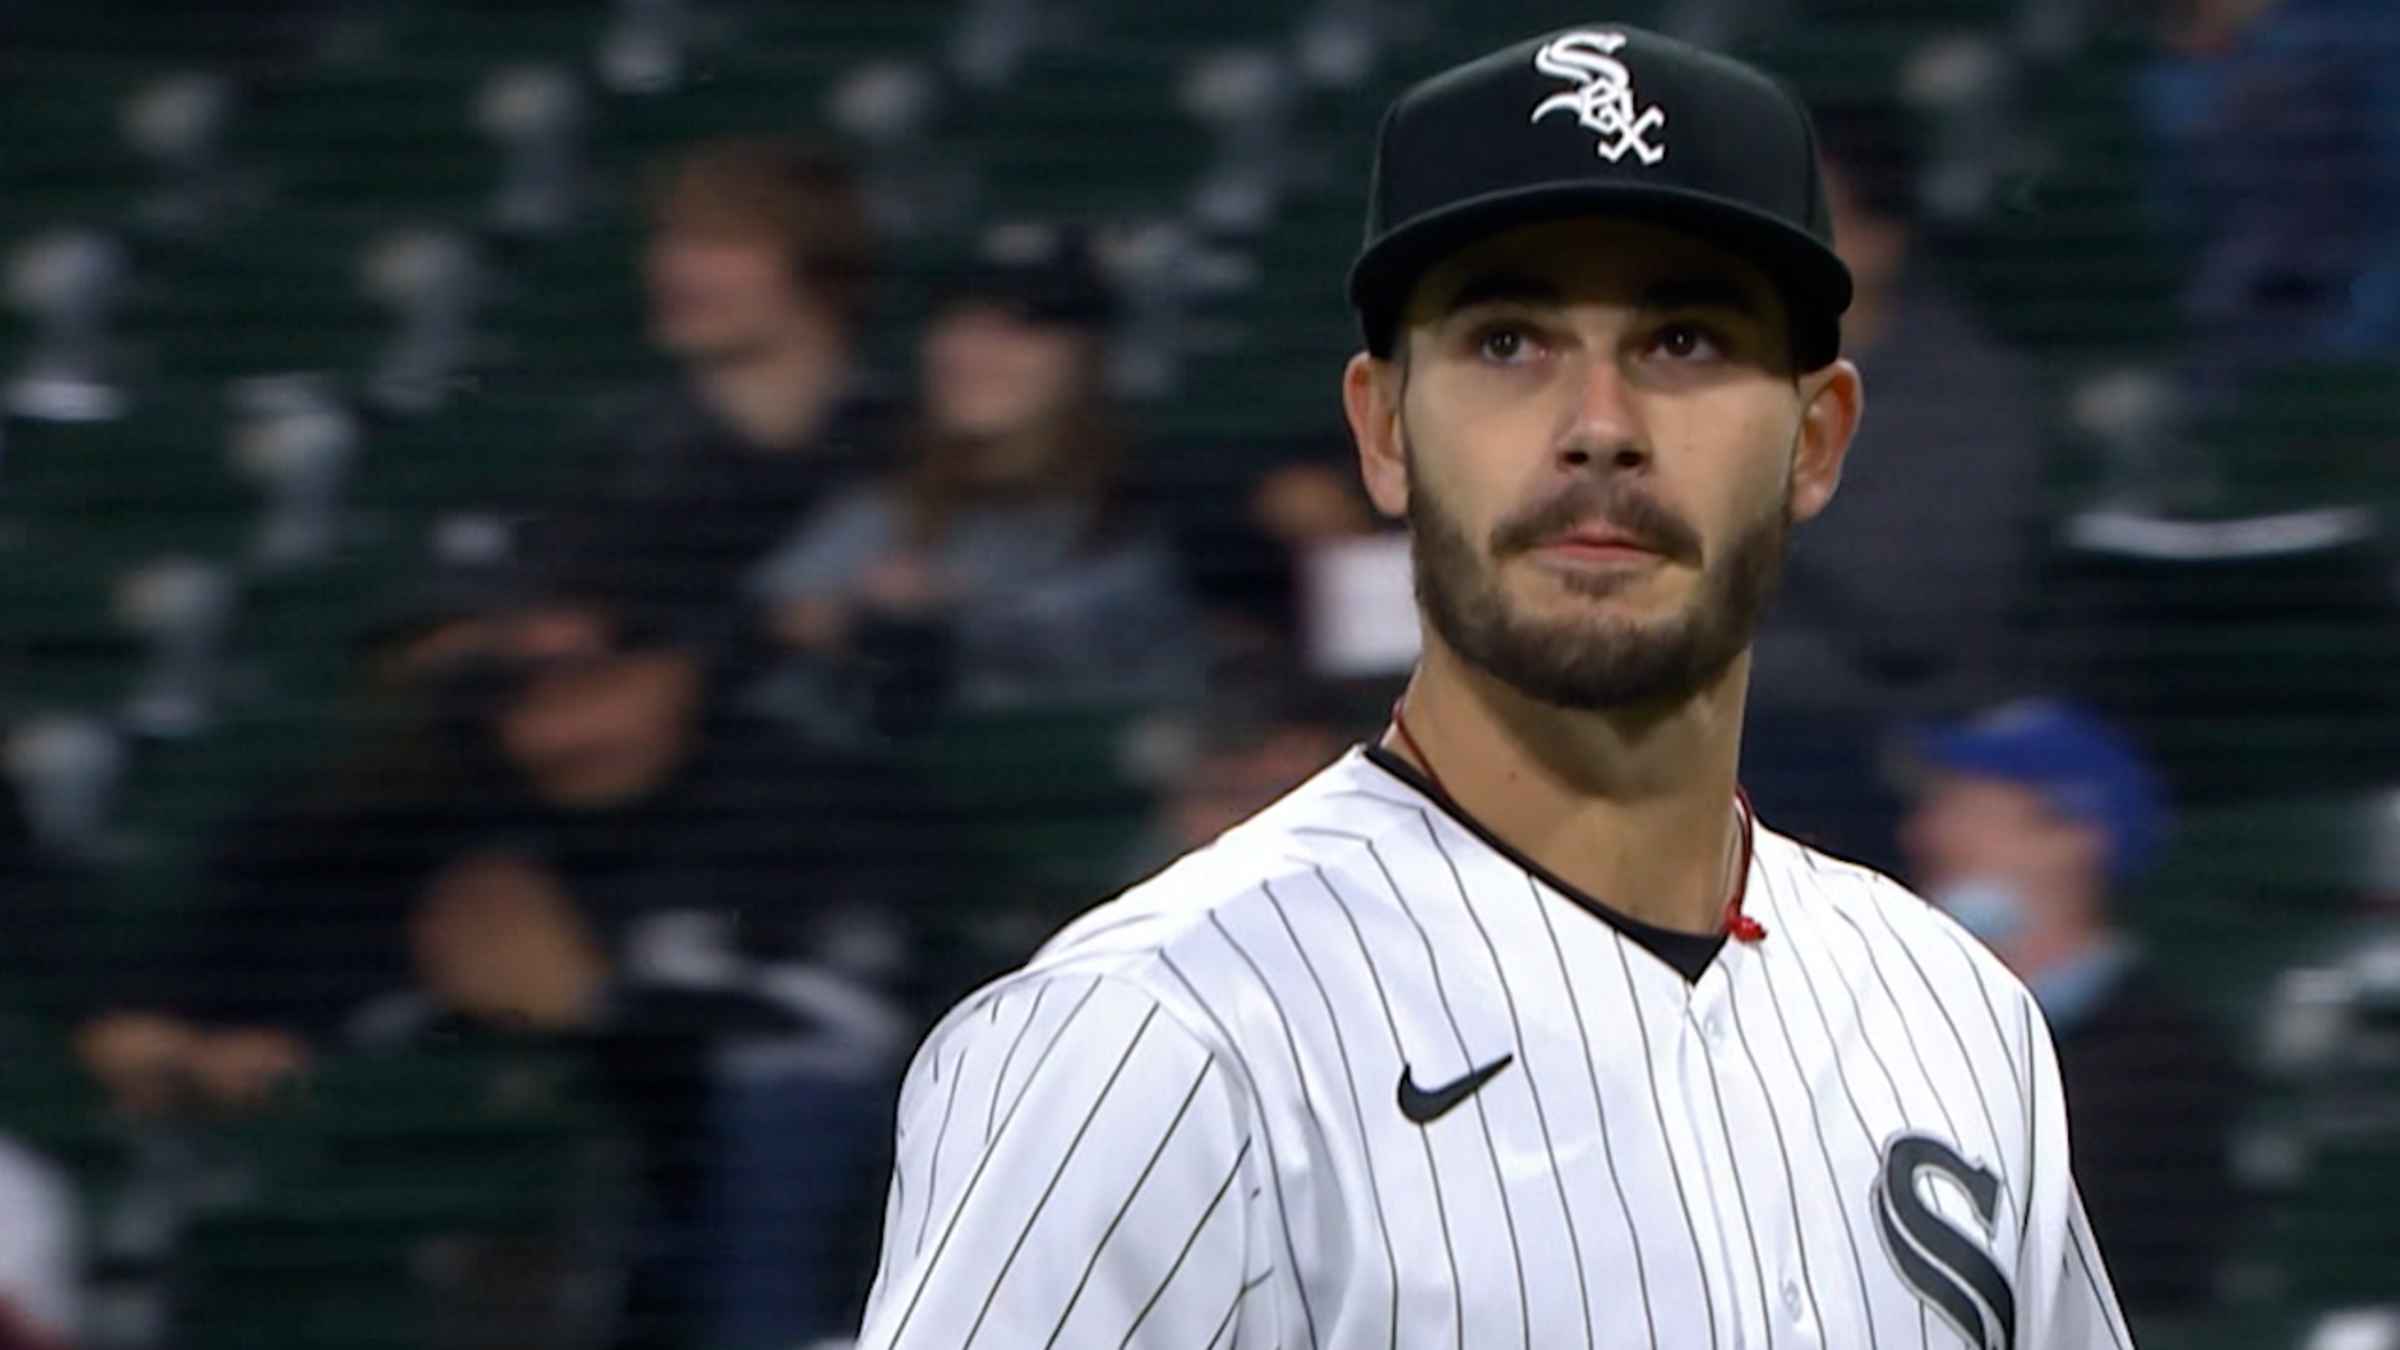 Dylan Cease completes a shutout, 04/29/2021